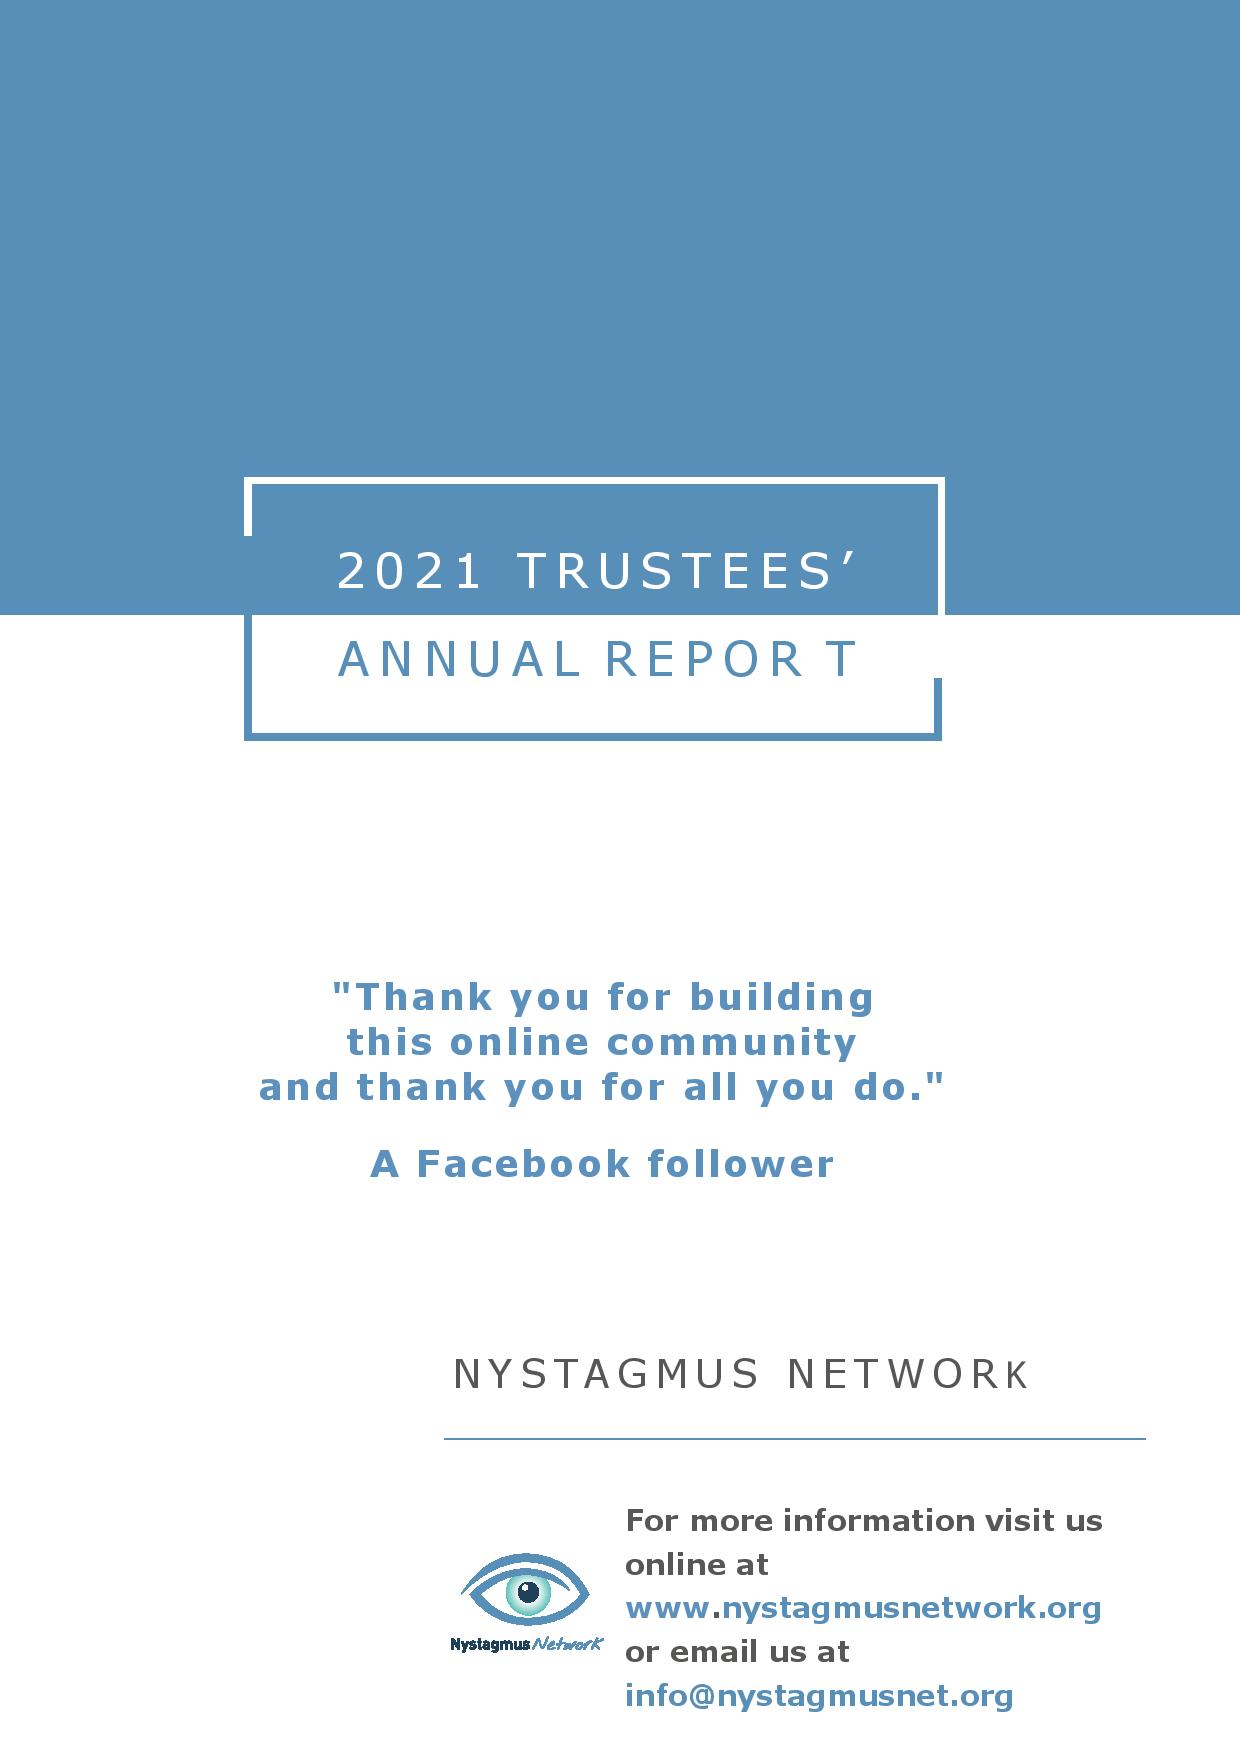 The front cover of the Nystagmus Network annual report 2021.